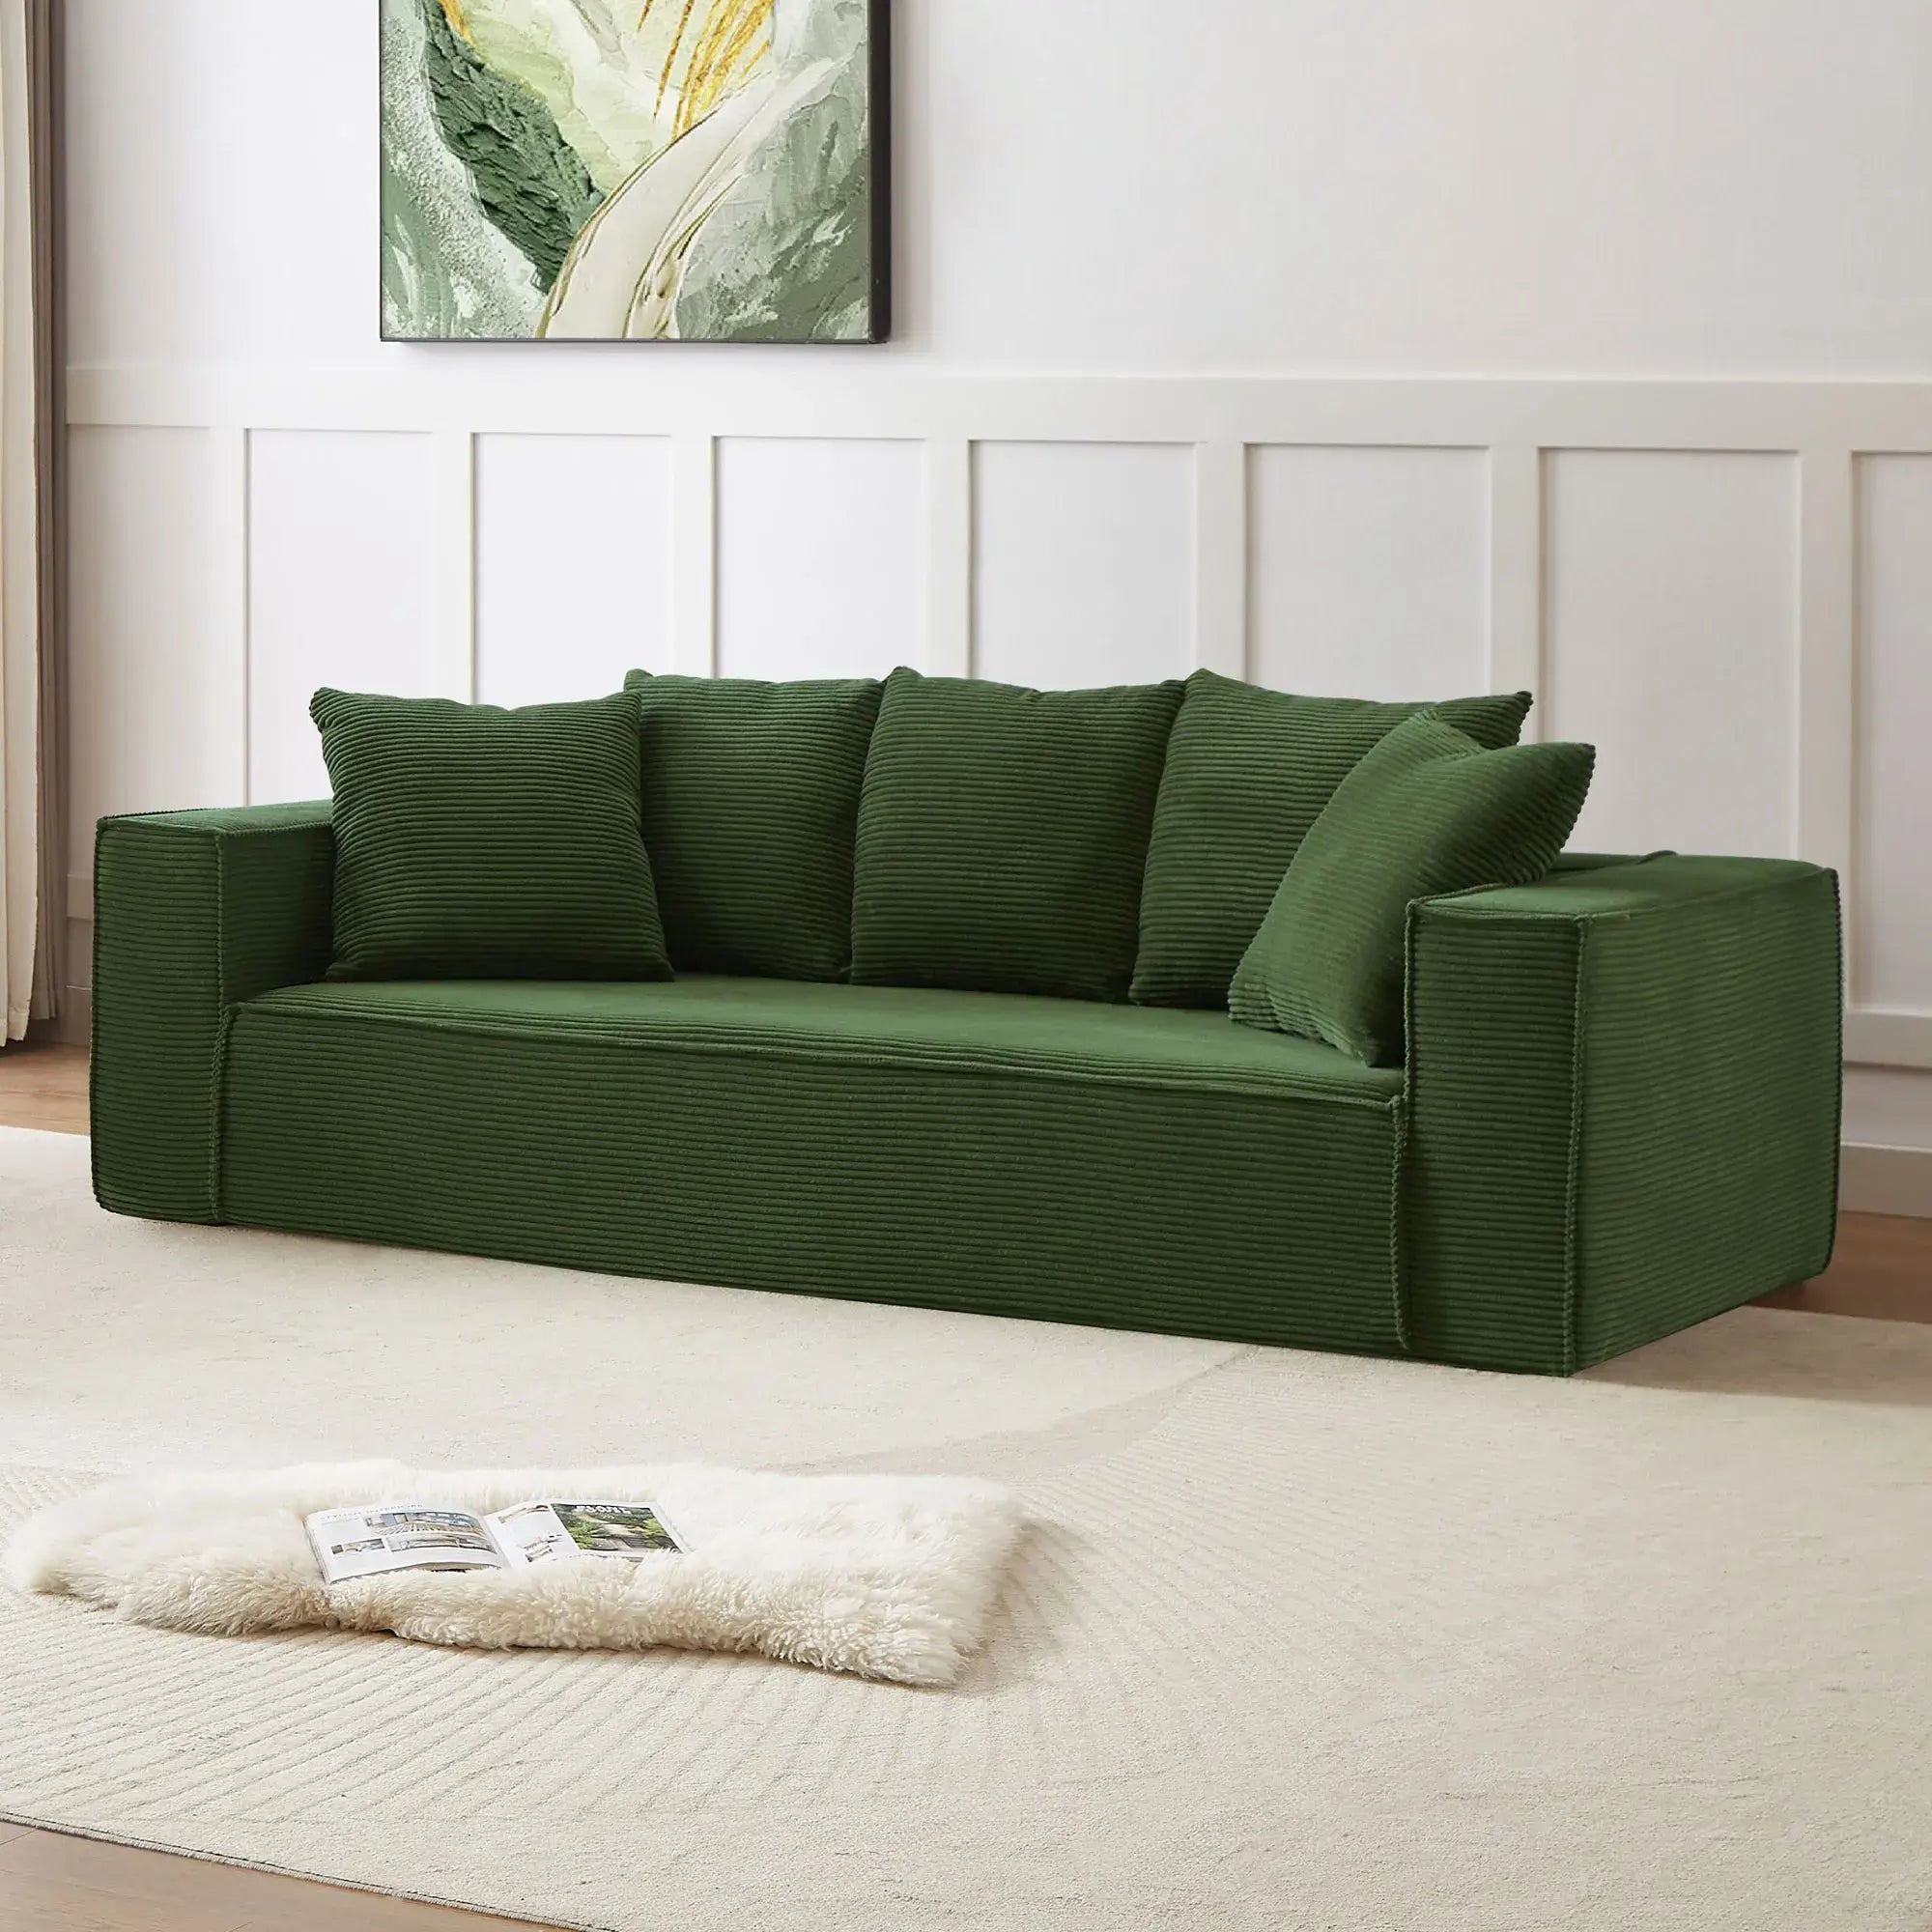 Louie Modern Corduroy Sofa, 3-Seater Couch for Living Room, Bedroom, Apartment in Green